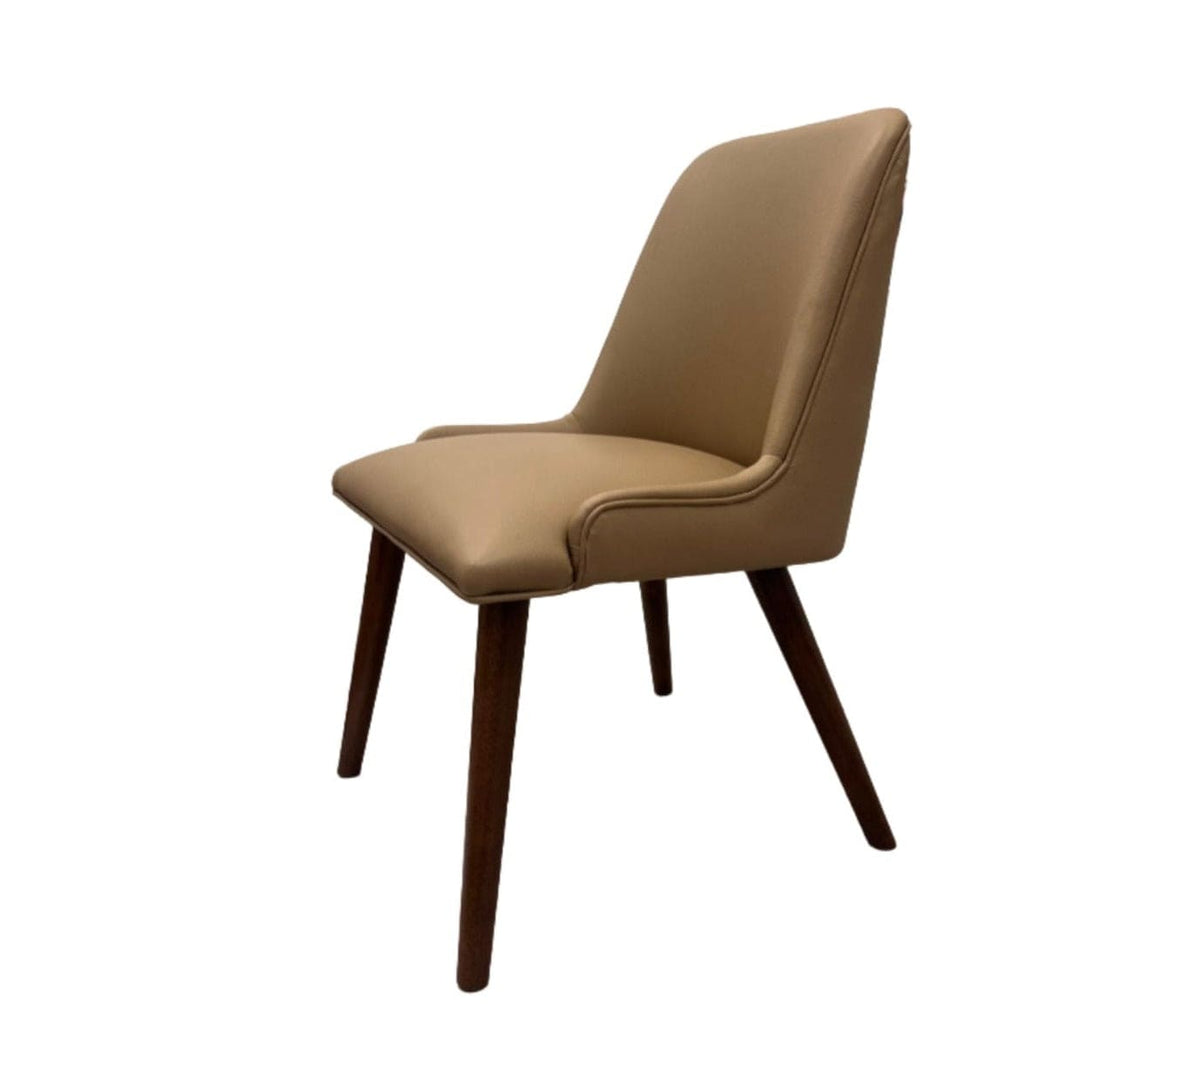 Americana Dining Chair PU Pavilion Brown ITG-1629DC picket and rail